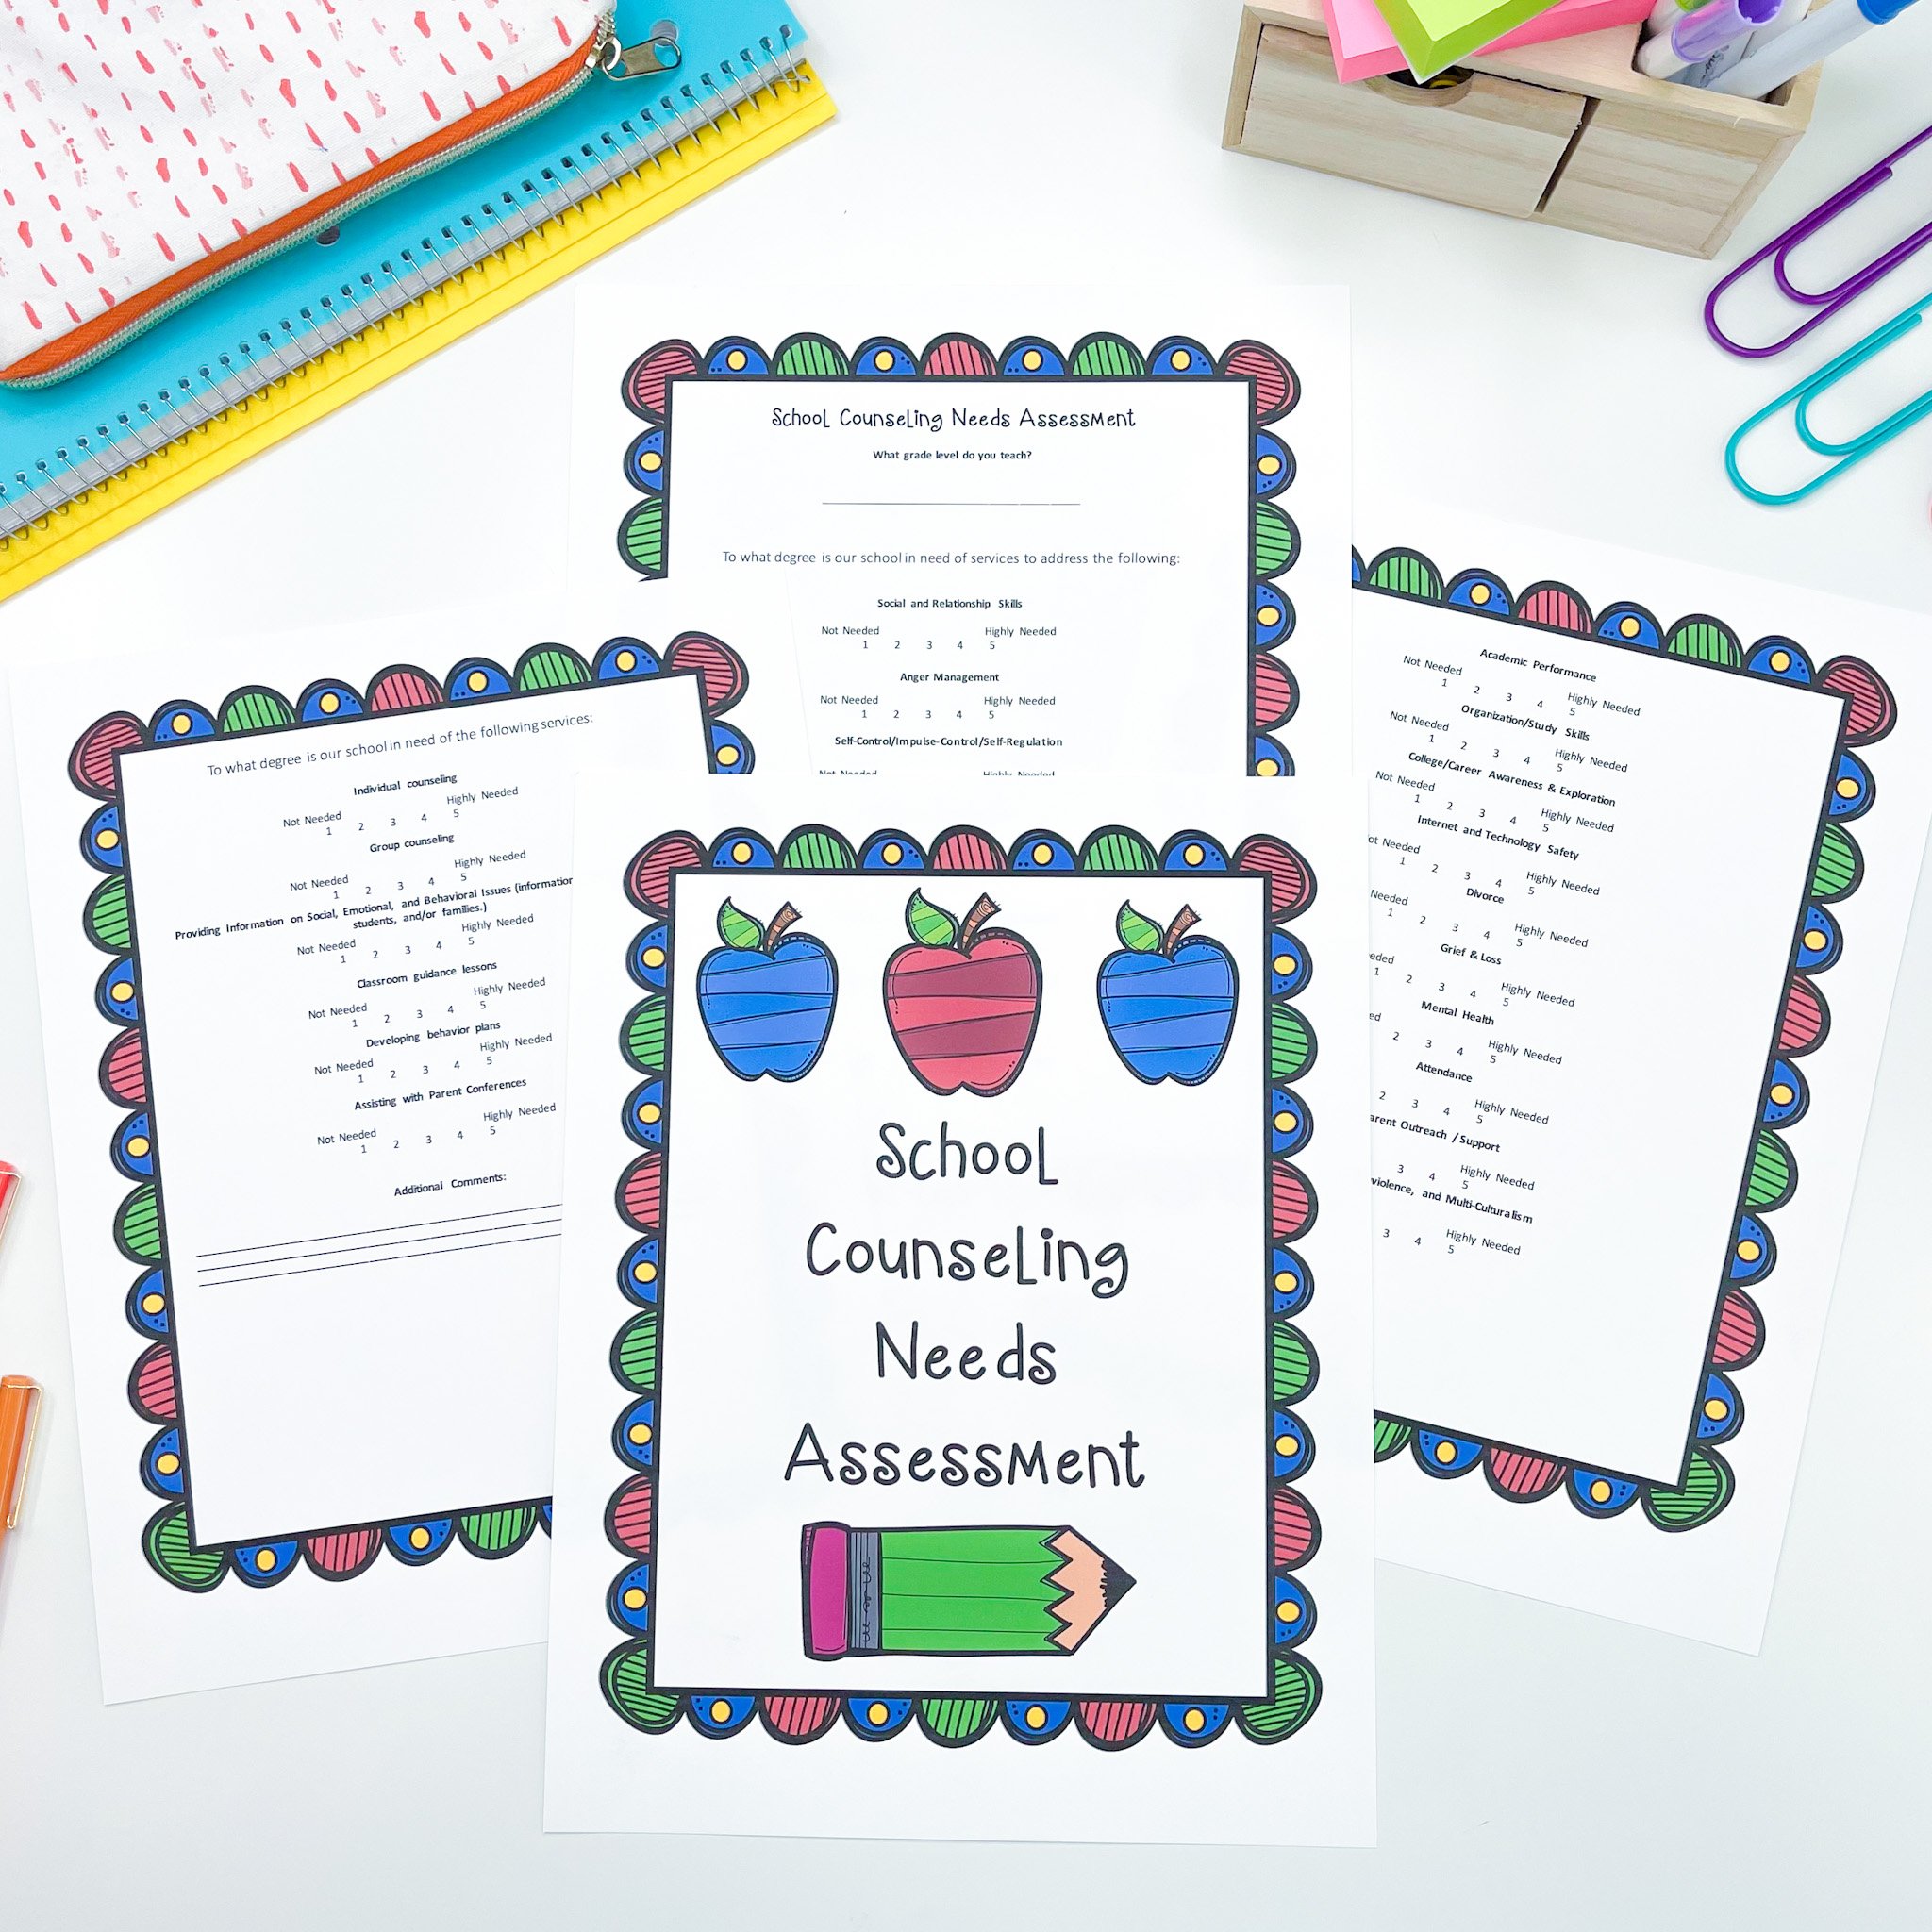 school counseling needs assessment form